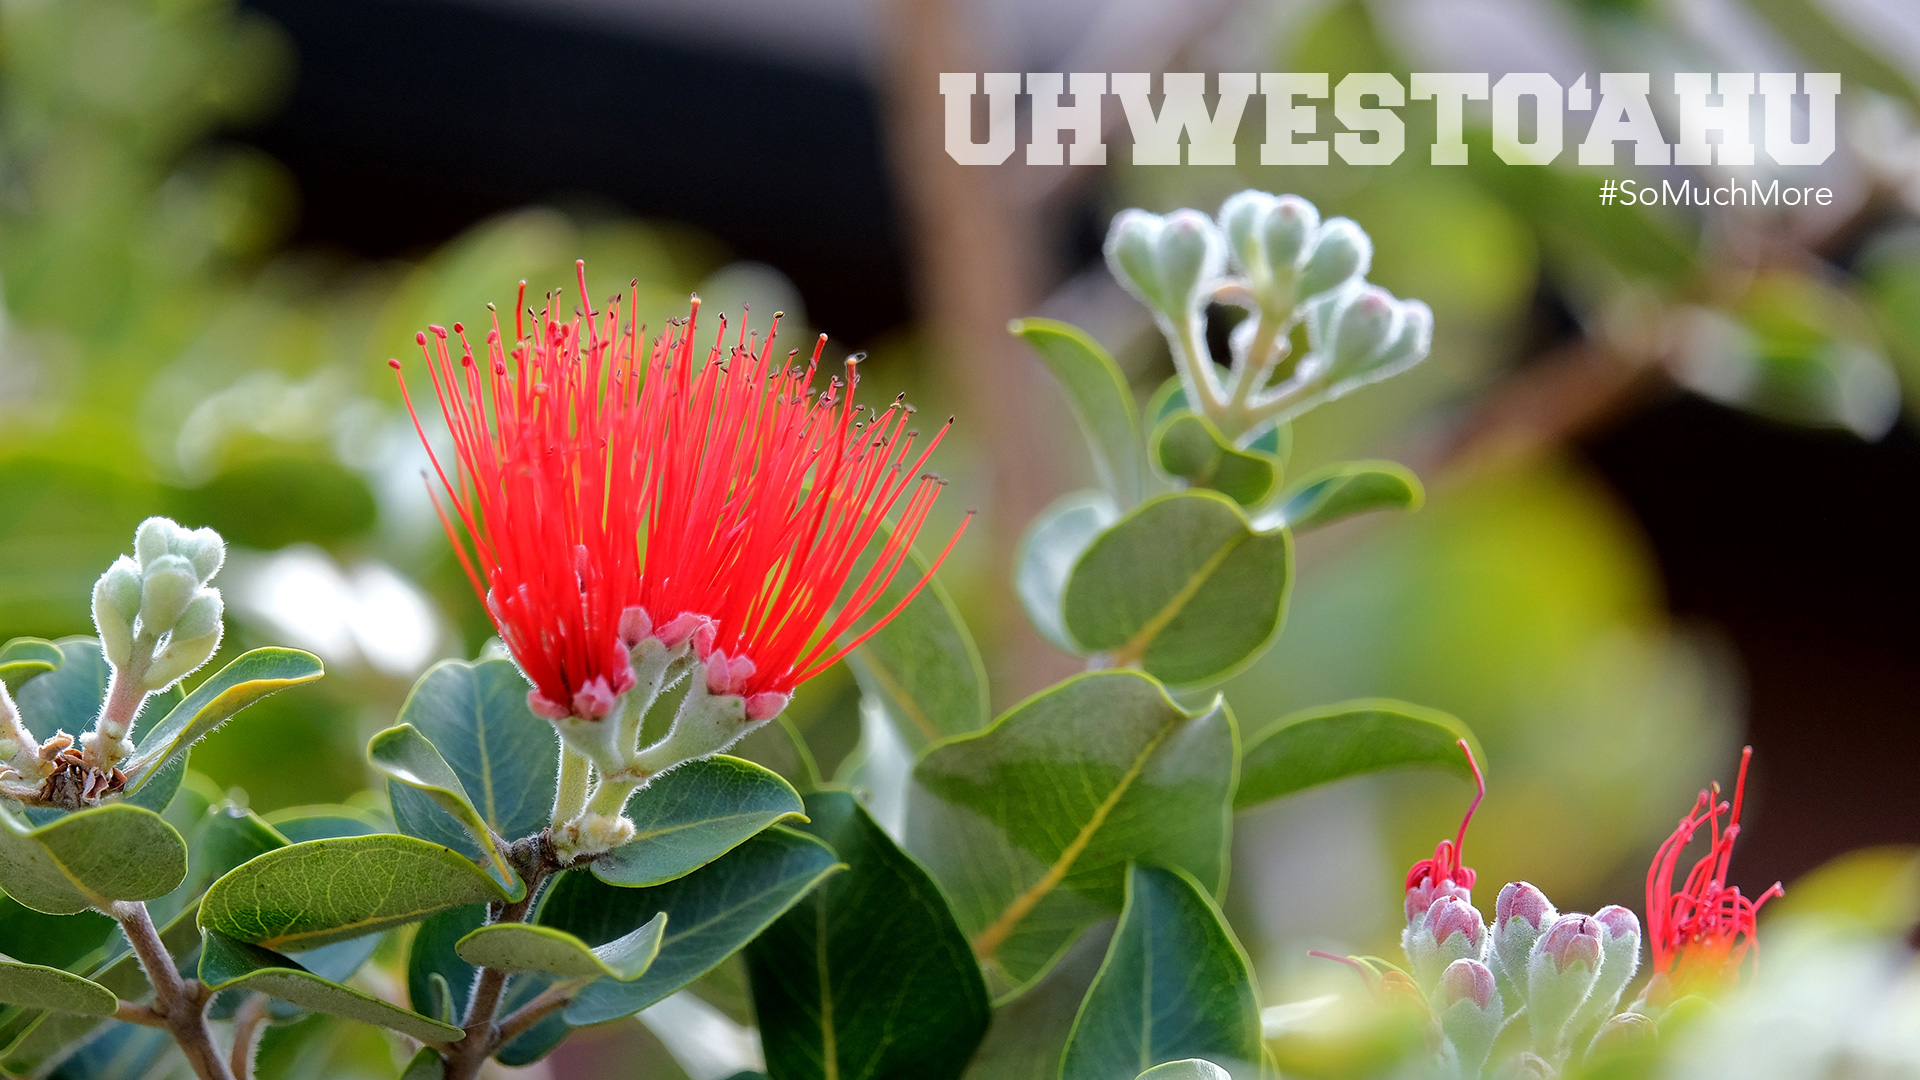 The red lehua flower in the campus mala.